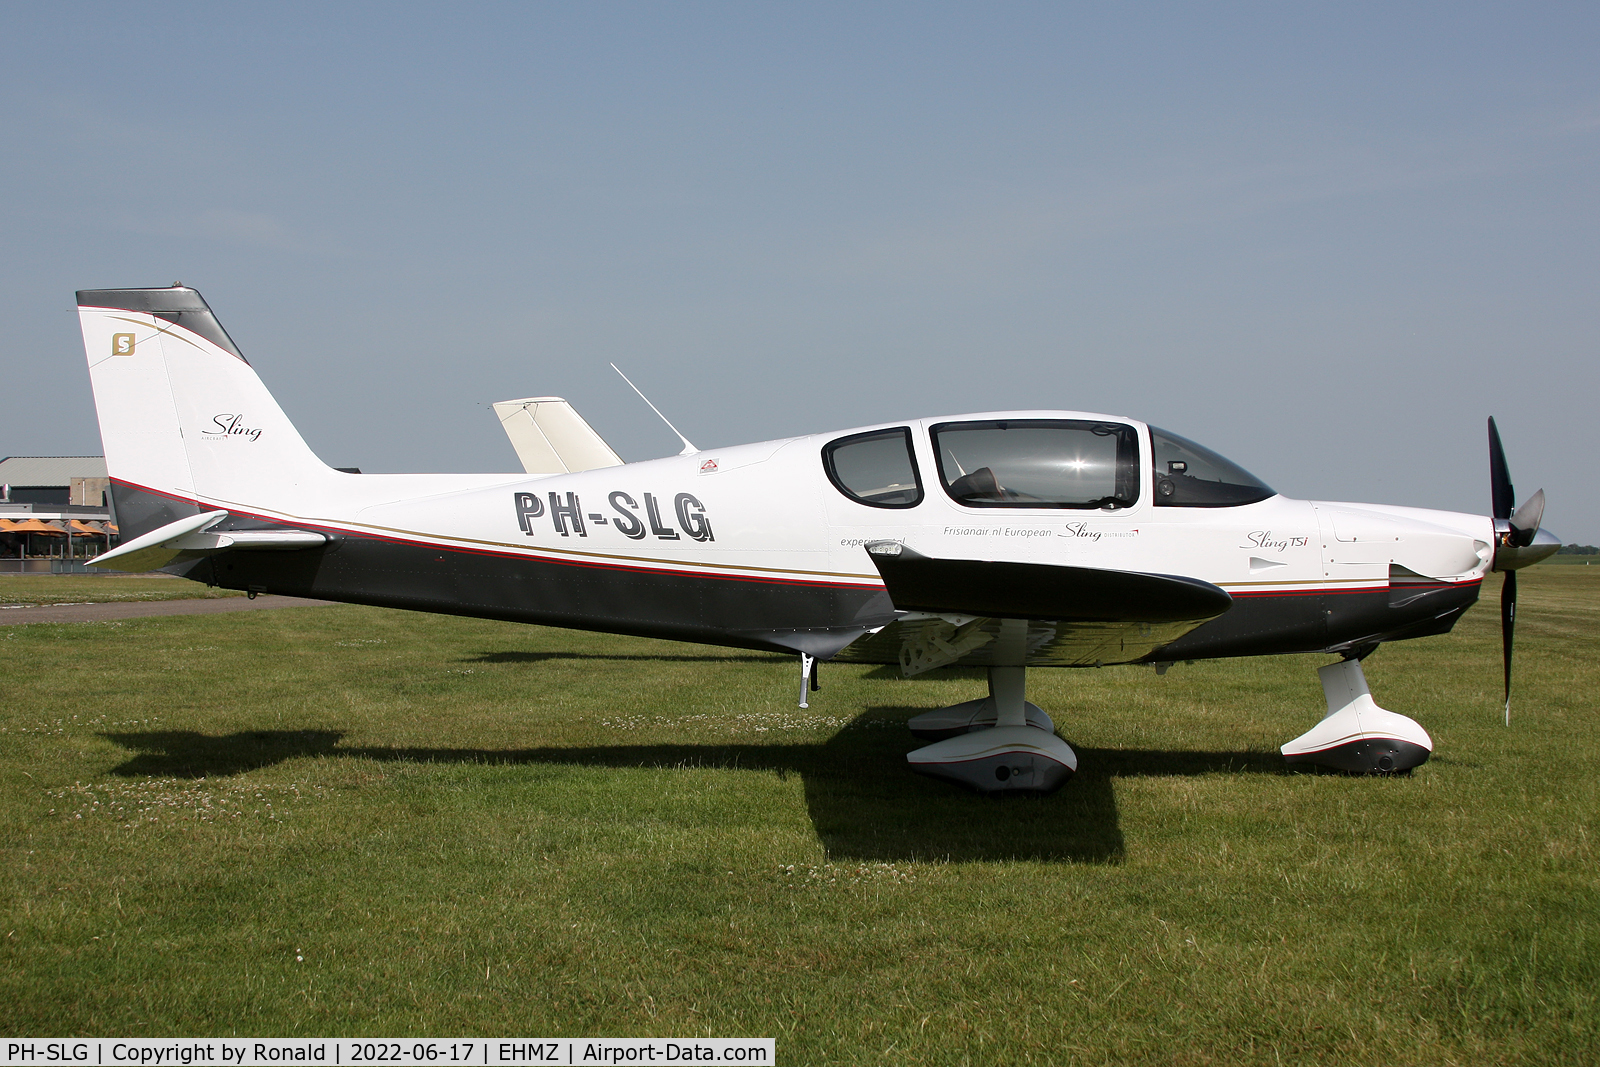 PH-SLG, 2020 The Airplane Factory Sling 4 TSi C/N Not found PH-SLG, at ehmz